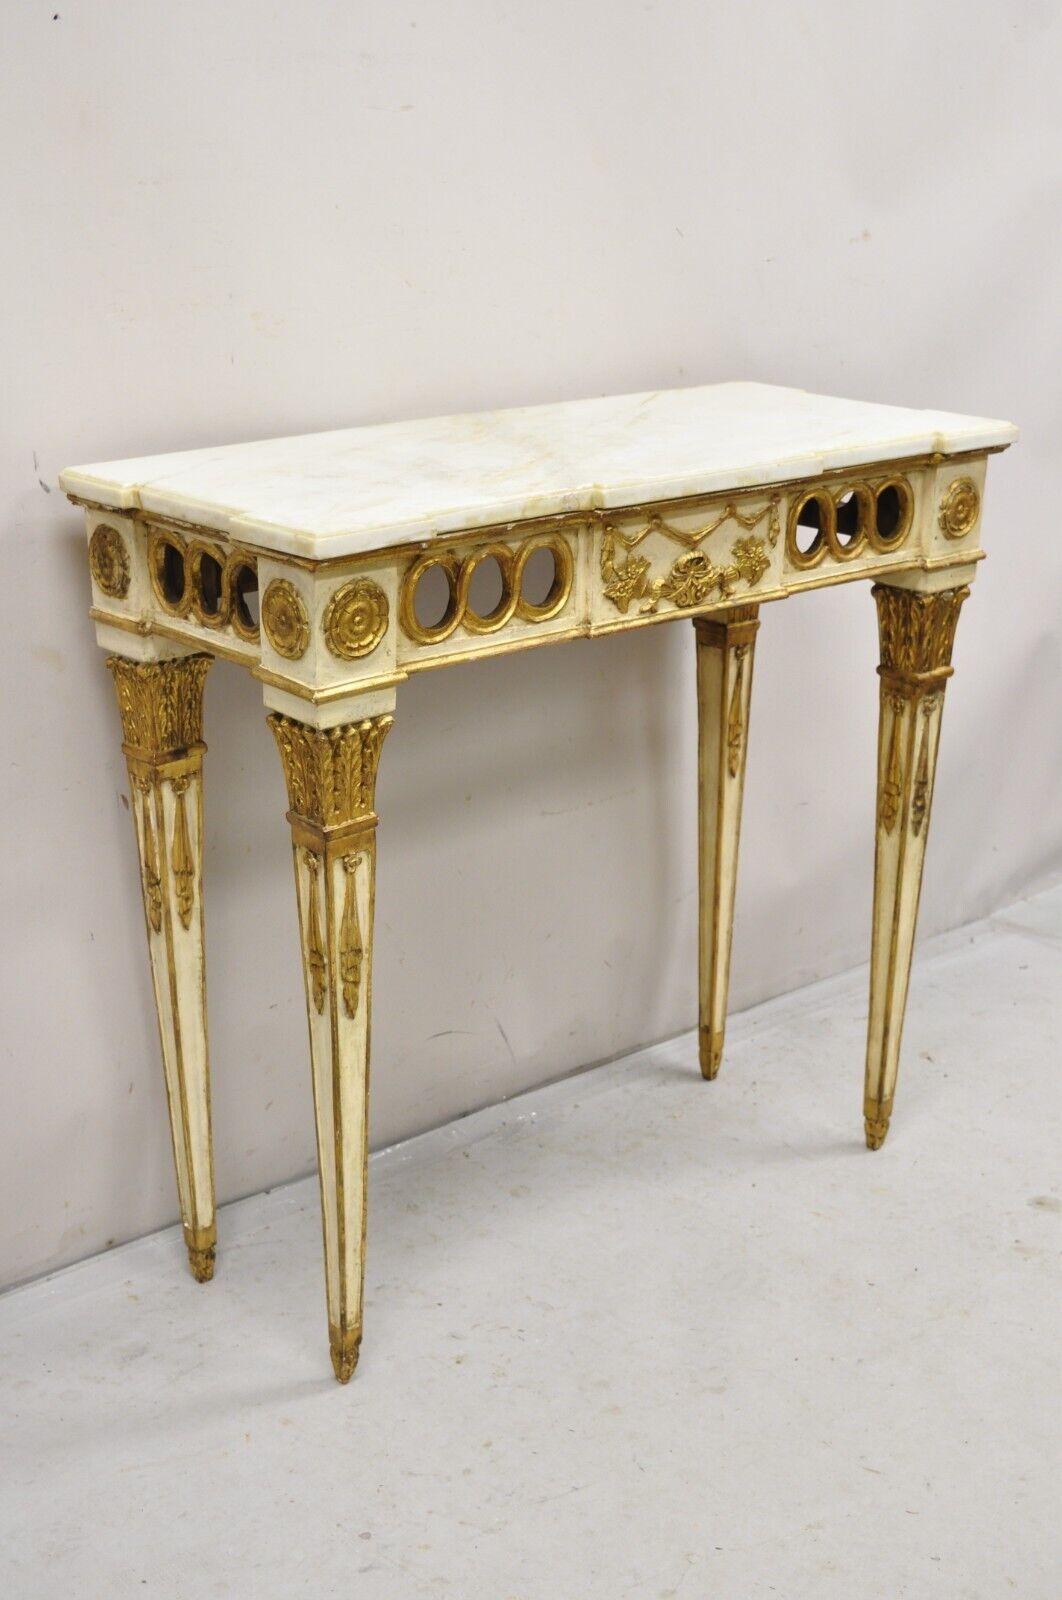 Vintage Italian Neoclassical Style Marble Top Cream and Gold Gilt Console Table. Circa 1950s.. Measurements: 36.5